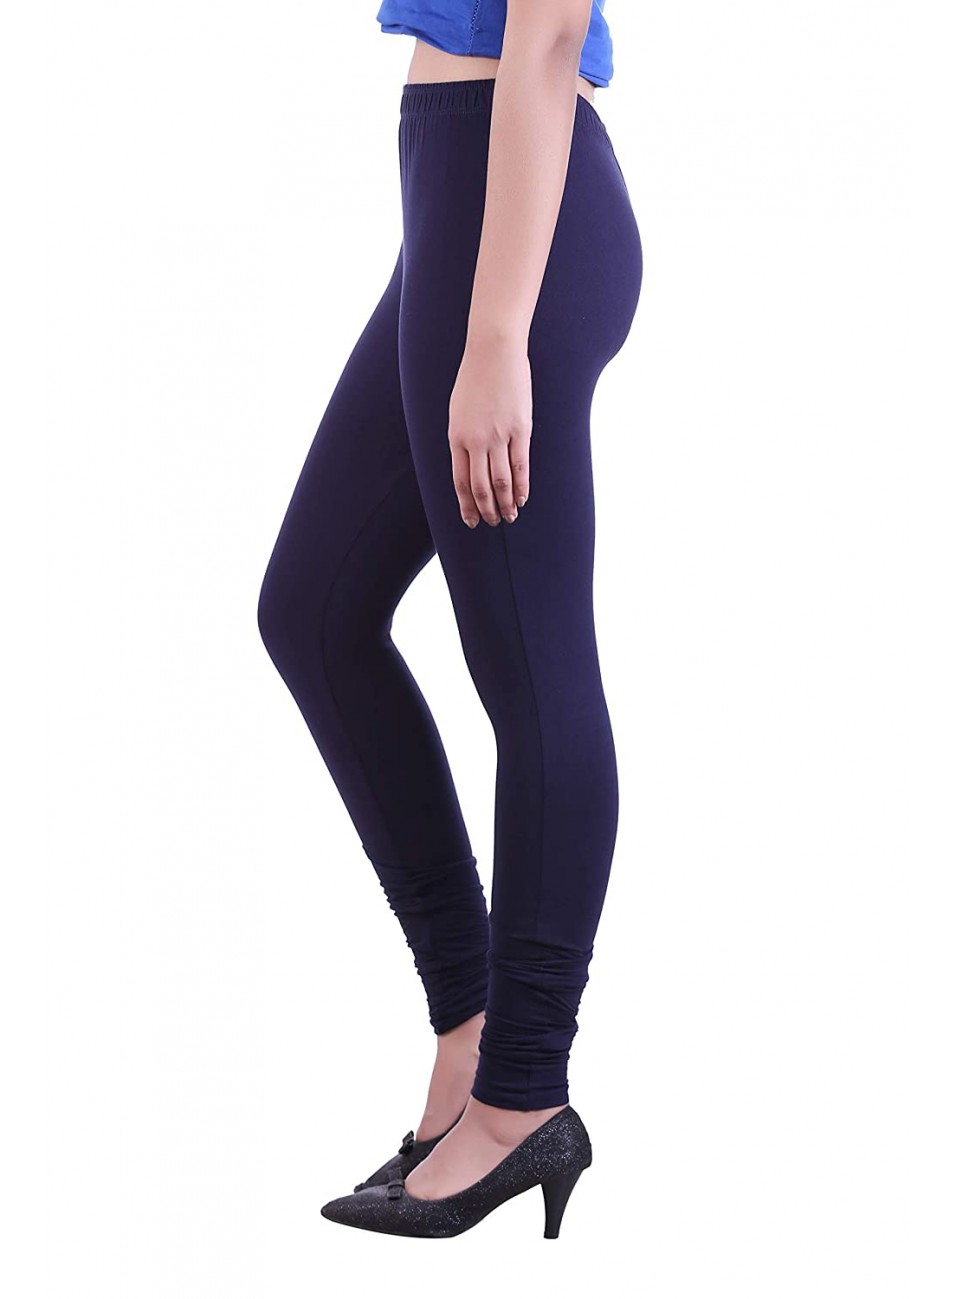 Premium quality girls leggings Available in all sizes Ready stock